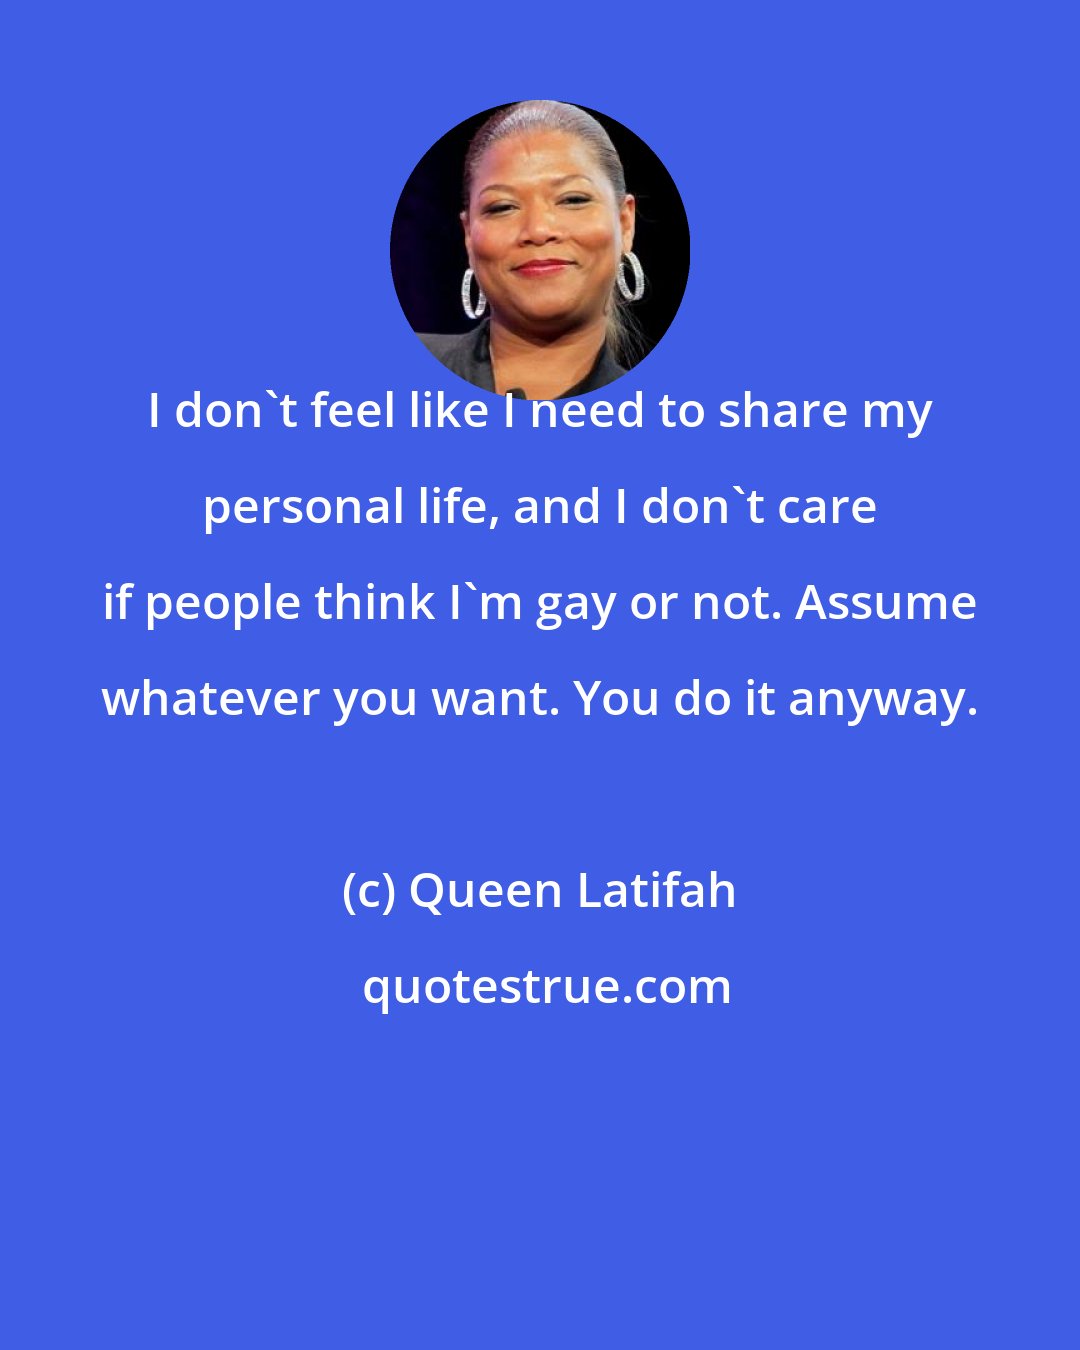 Queen Latifah: I don't feel like I need to share my personal life, and I don't care if people think I'm gay or not. Assume whatever you want. You do it anyway.